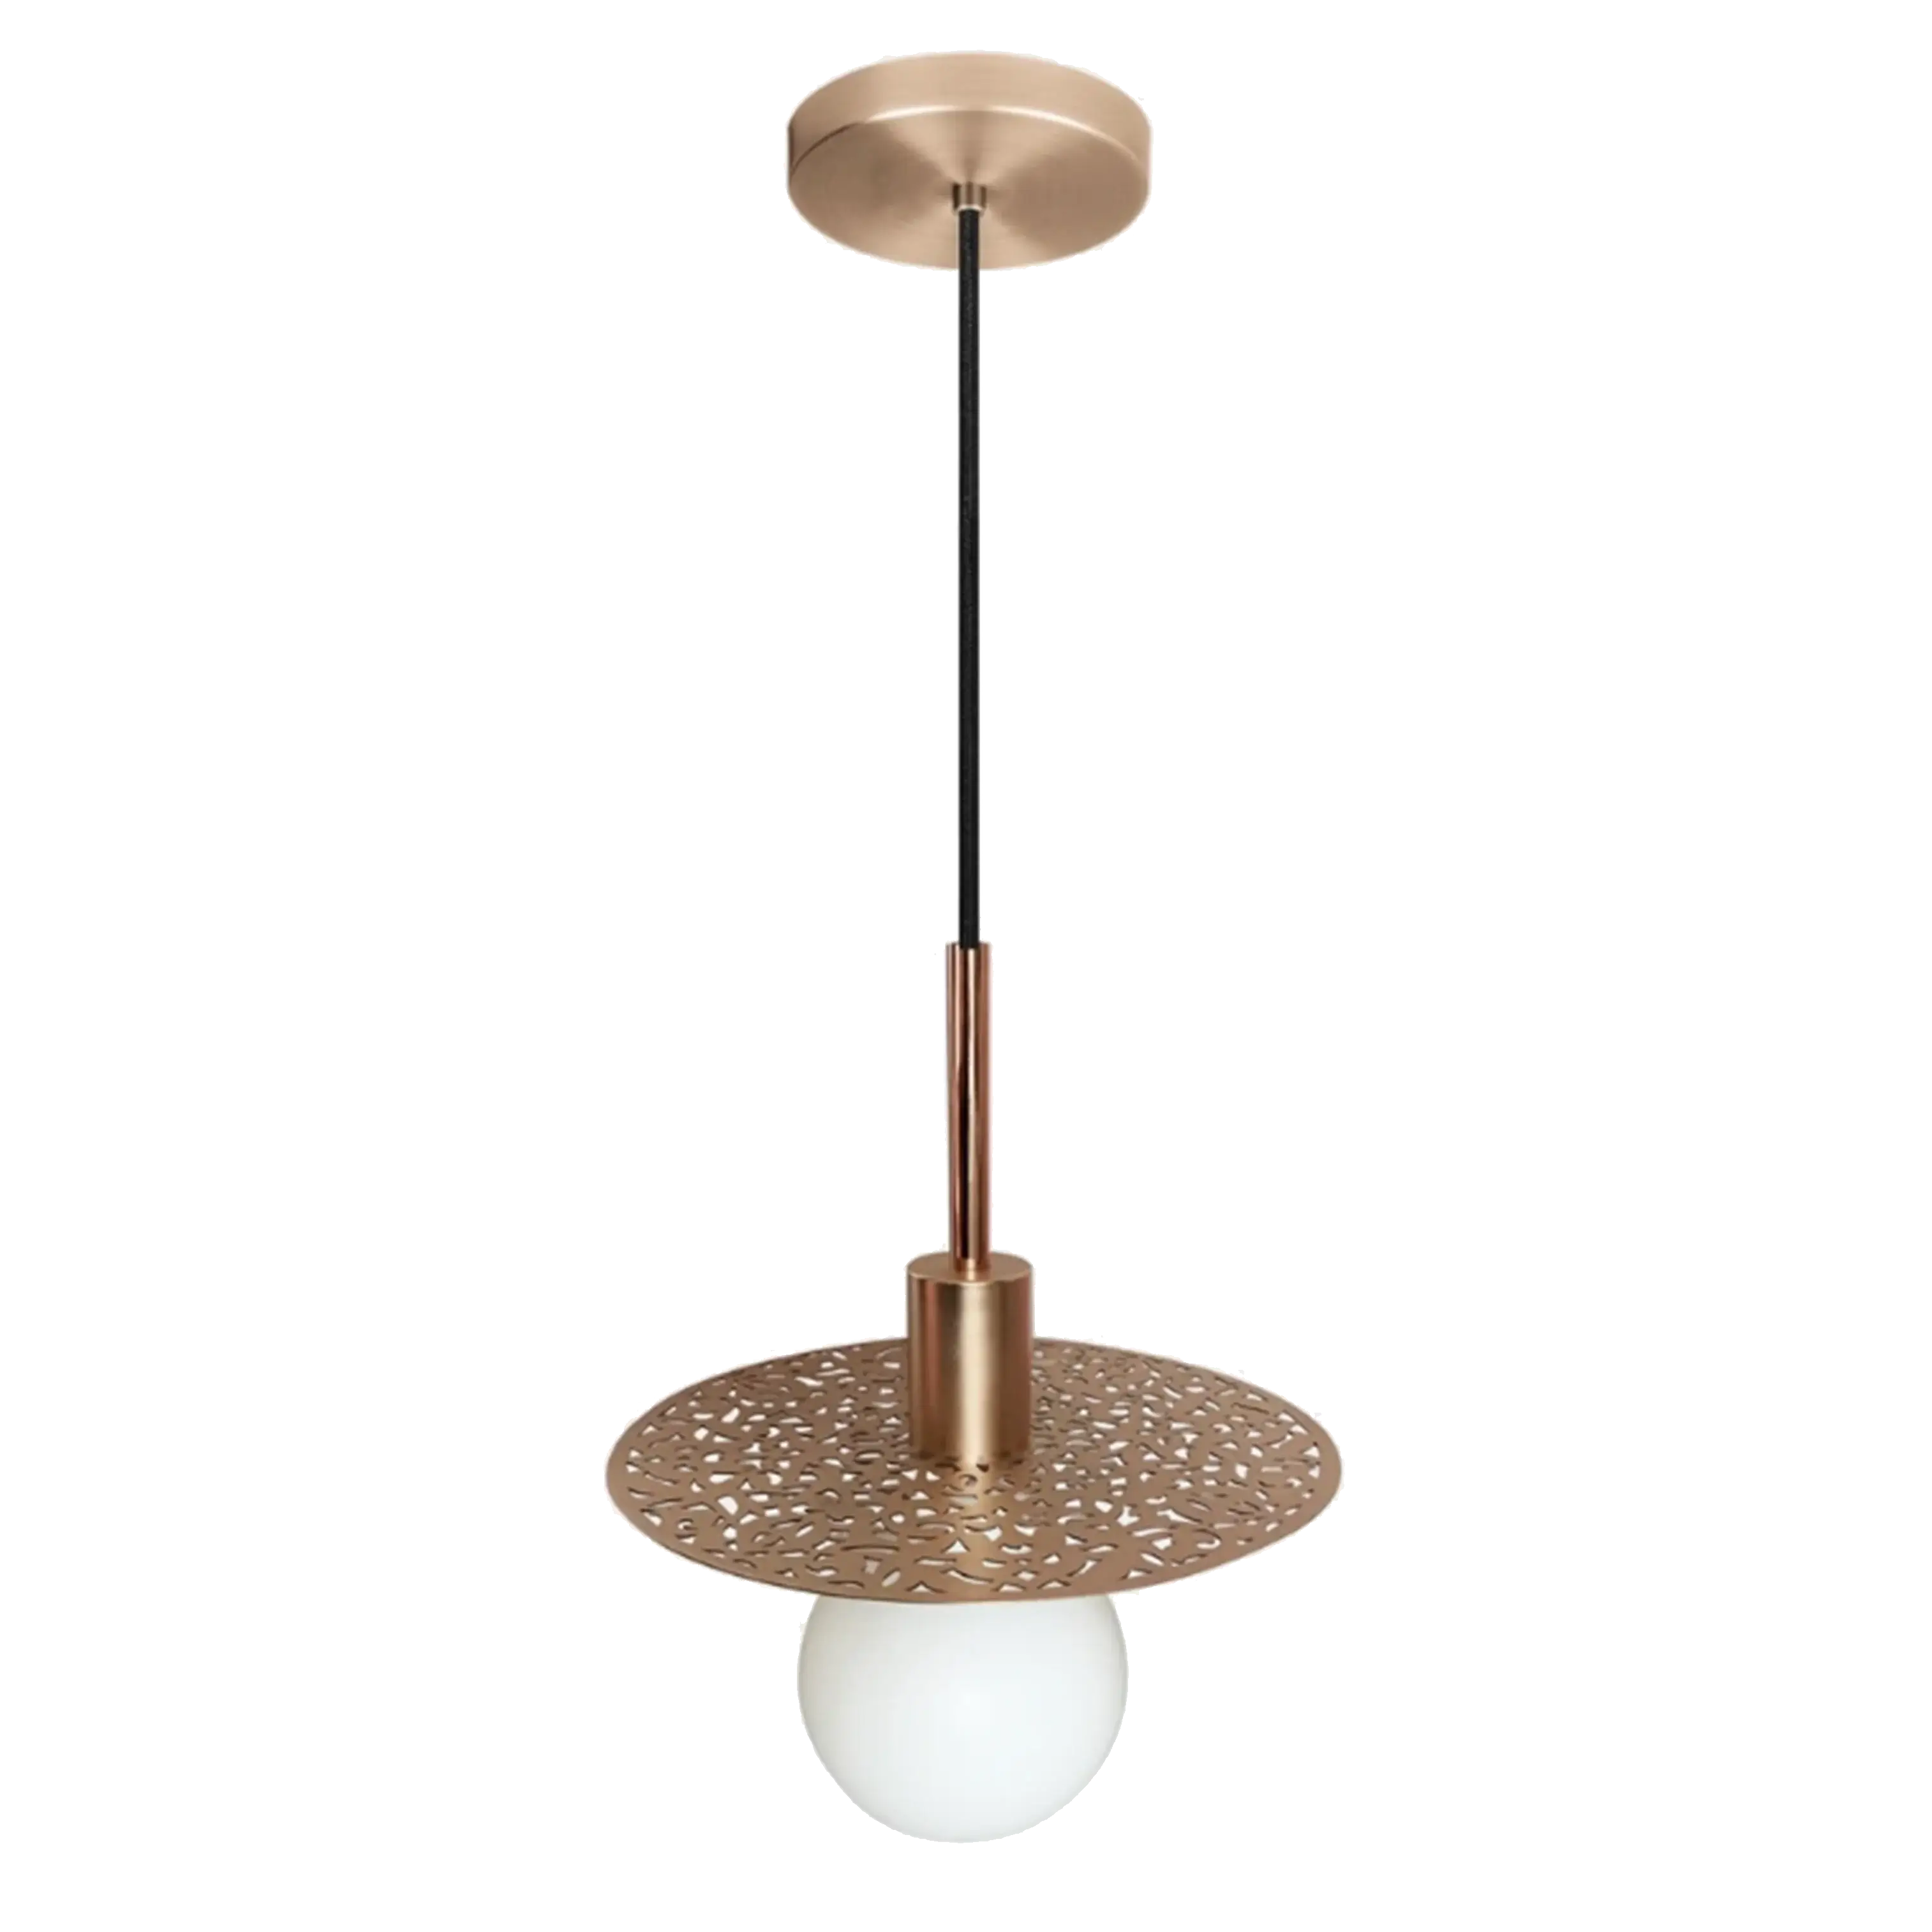 Dounia home Pendant light in polished copper made of Metal, Model: Riad disc LED Suspension